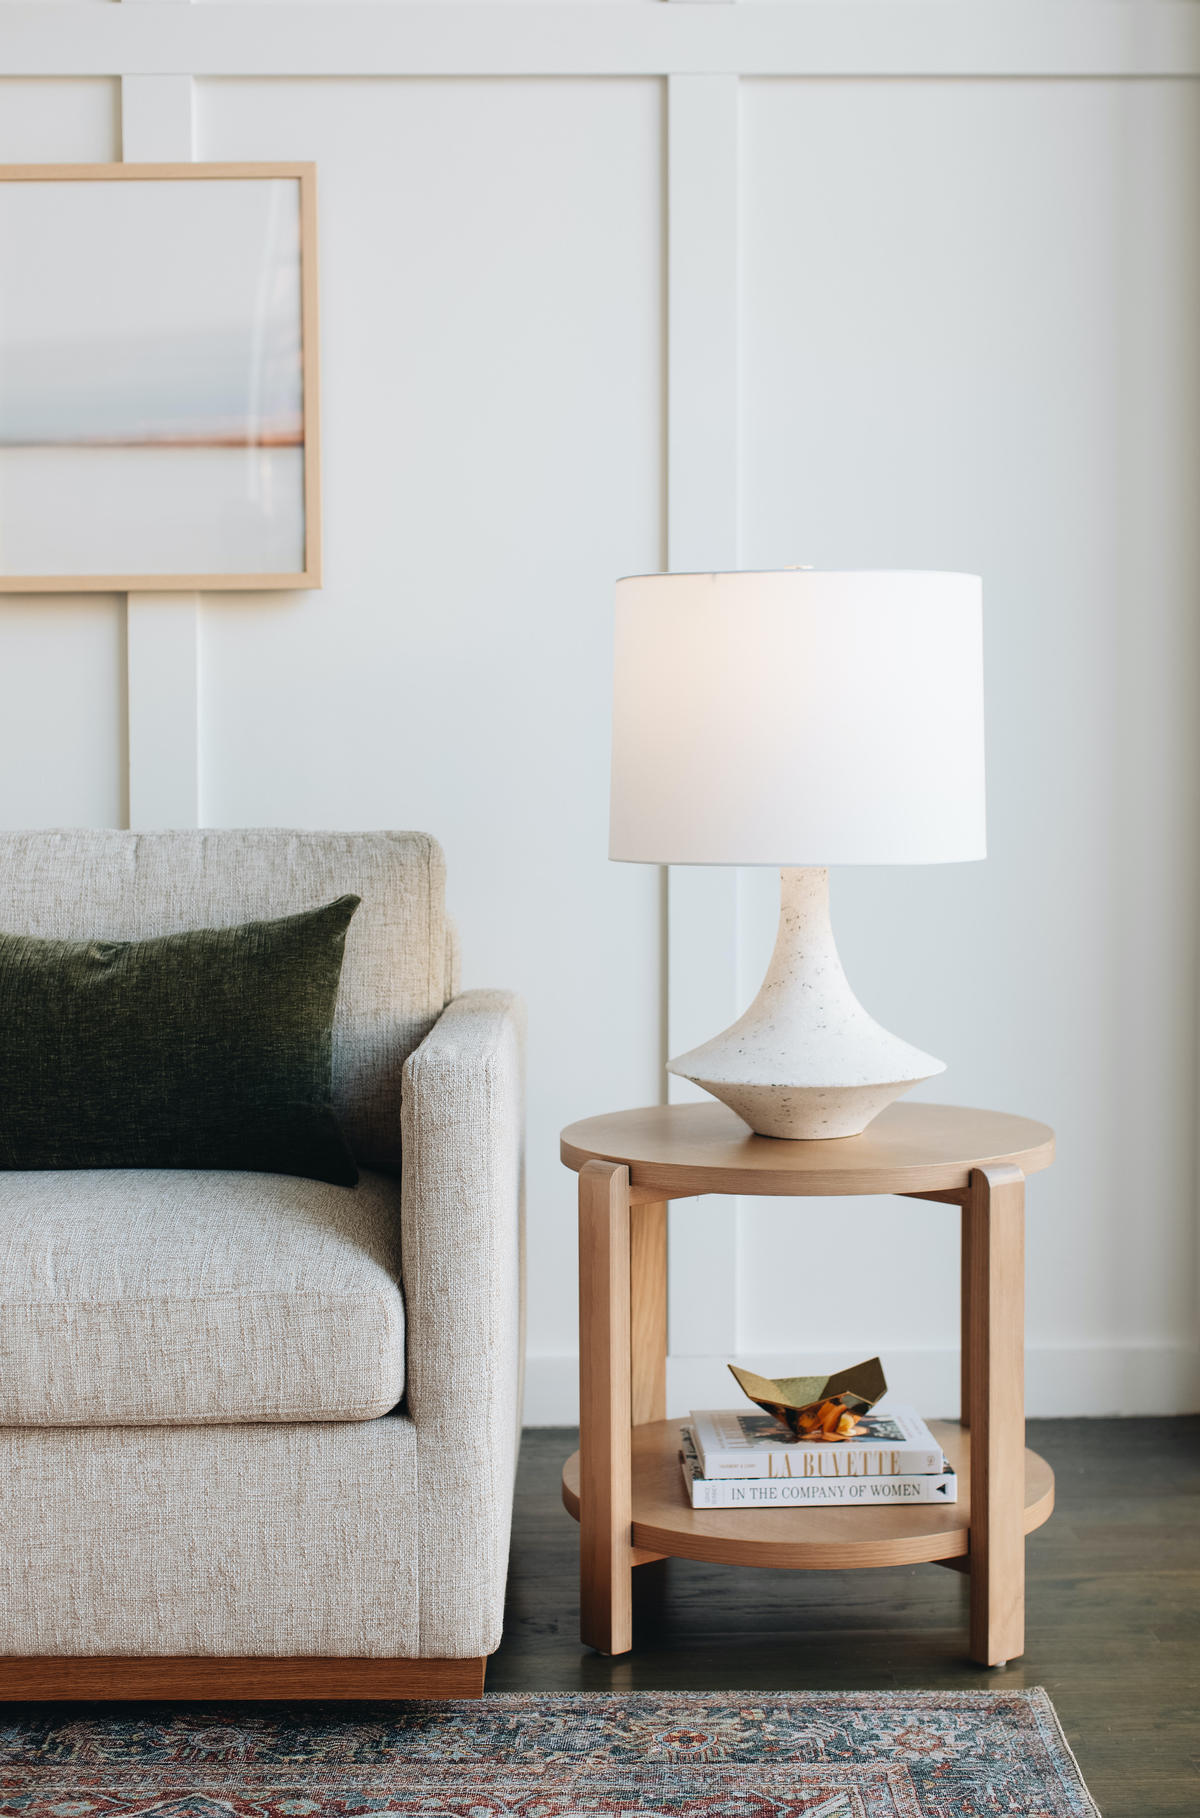 The Emery lamp from Interior Define